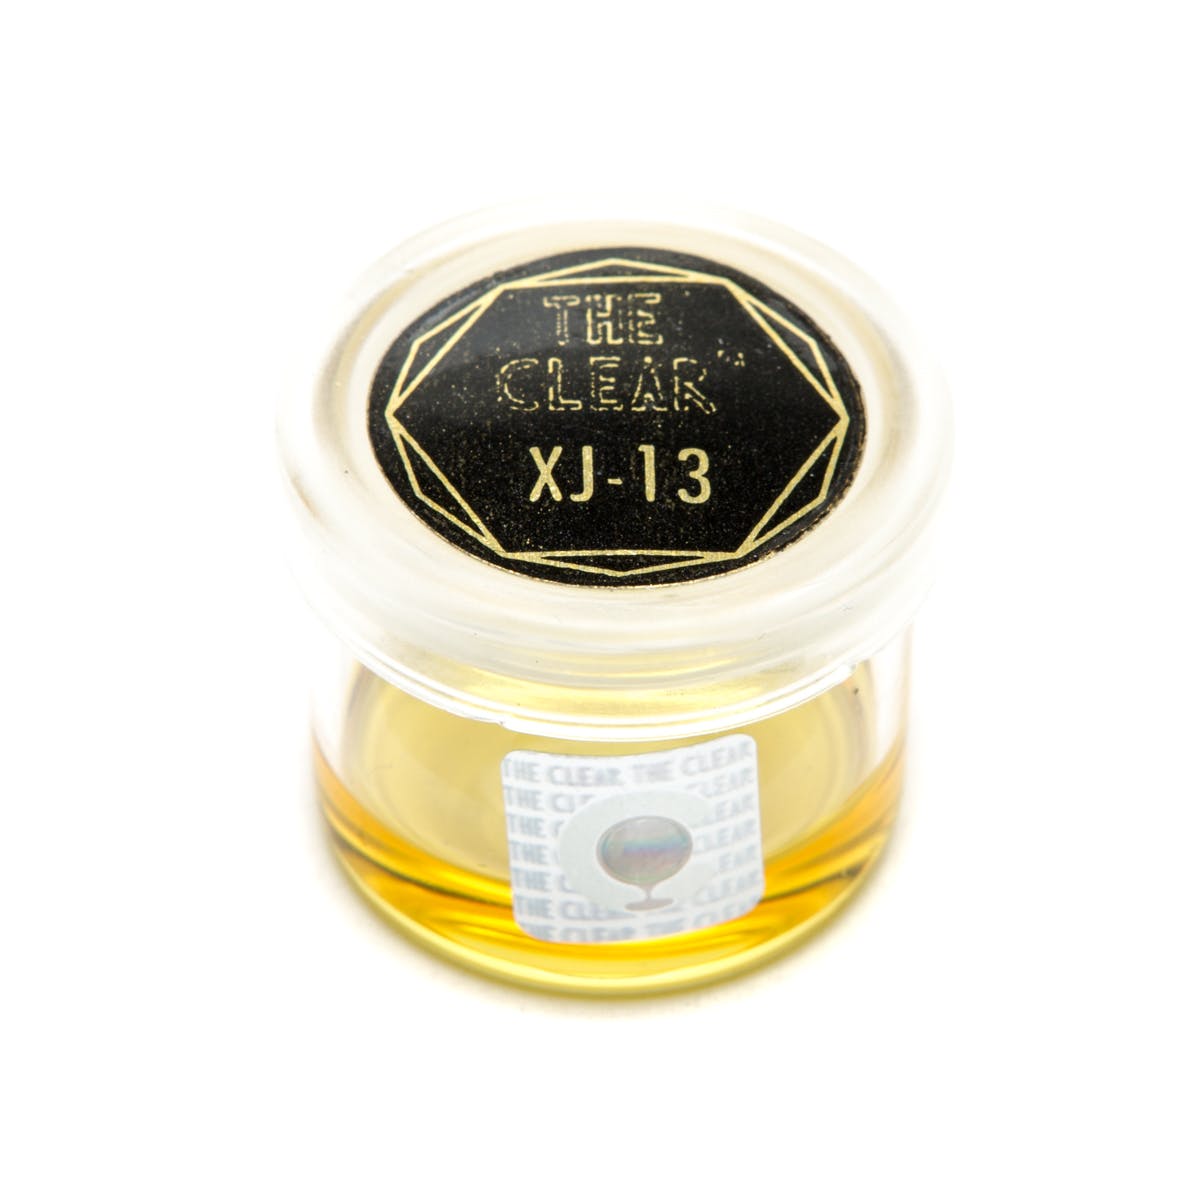 concentrate-the-clear-honey-bucket-xj-13-2c-1g